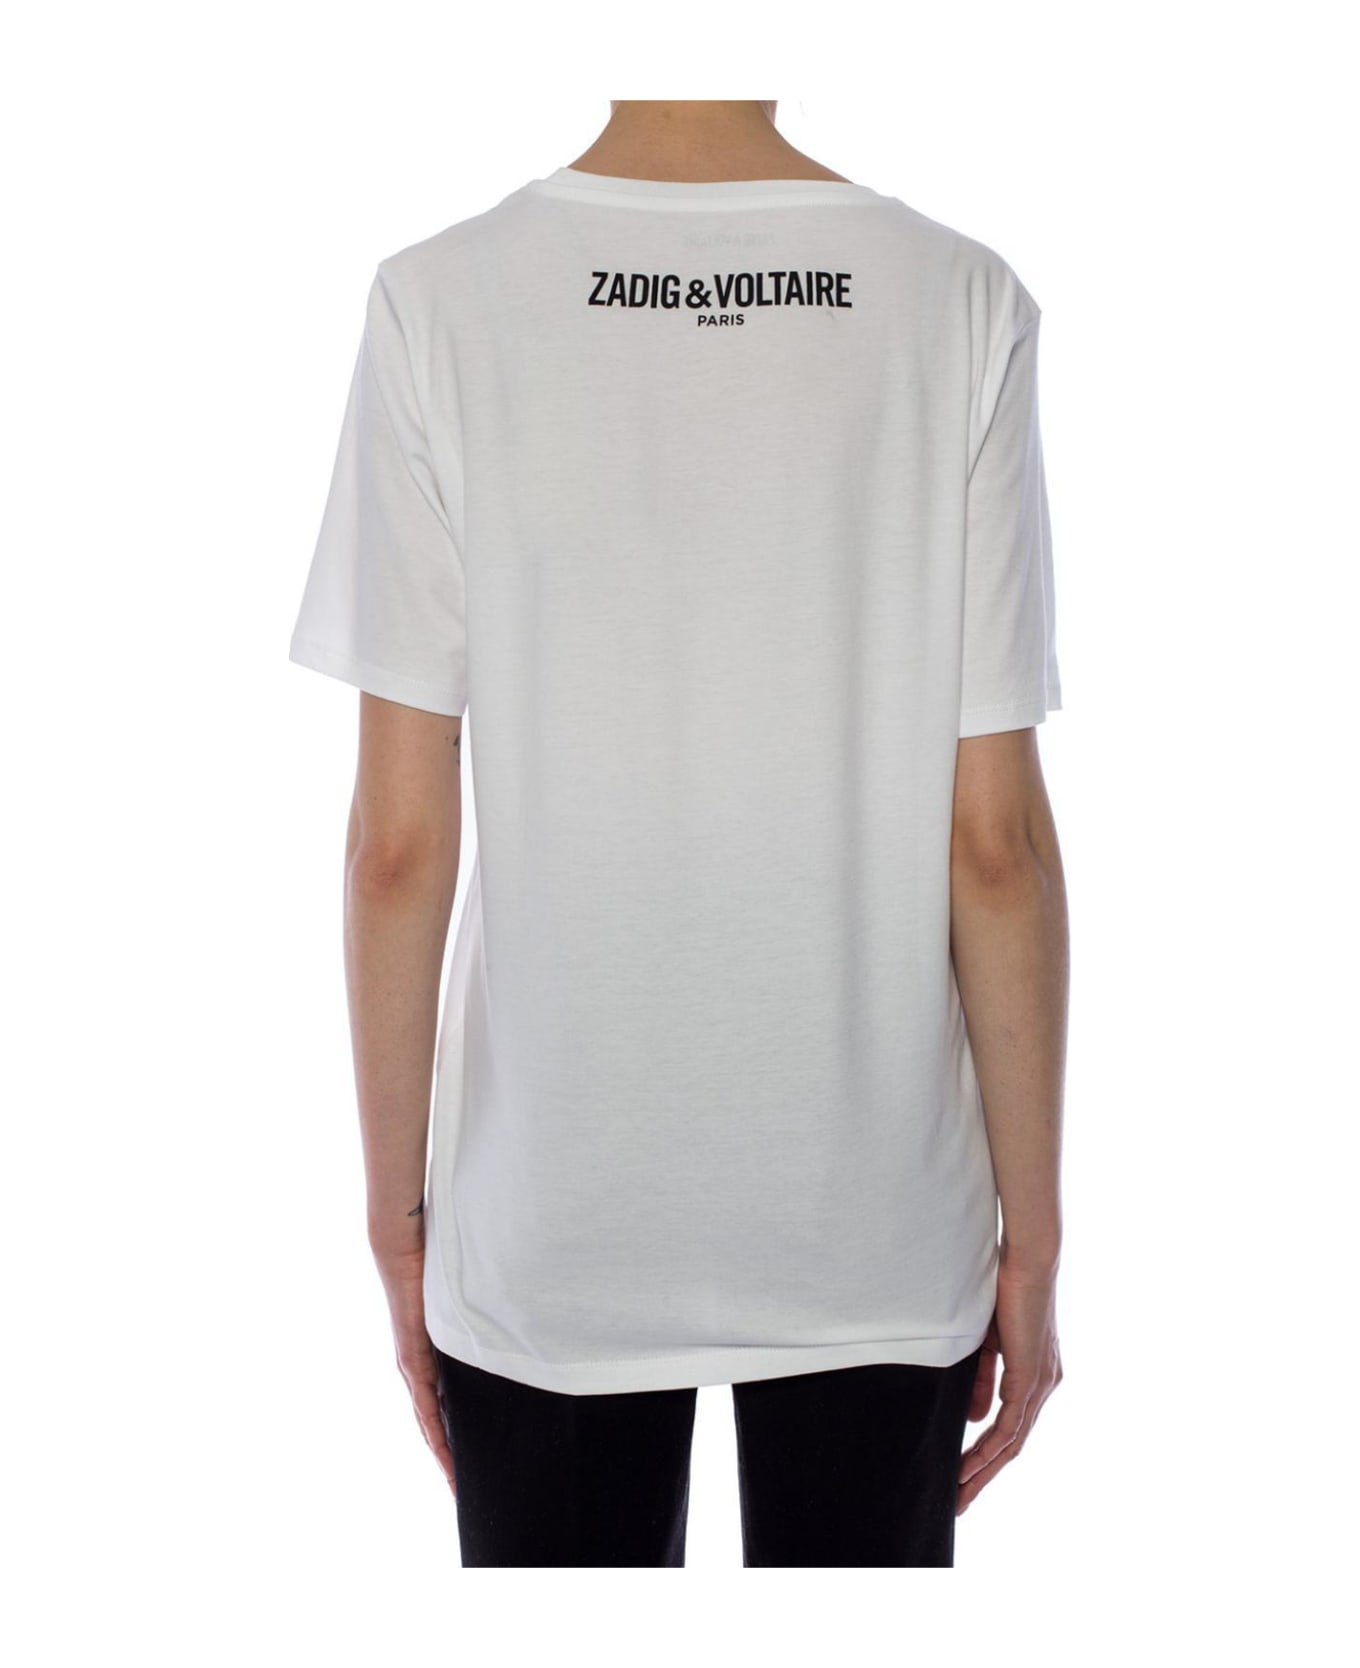 Zadig & Voltaire Patterned T-shirt - WHITE Tシャツ